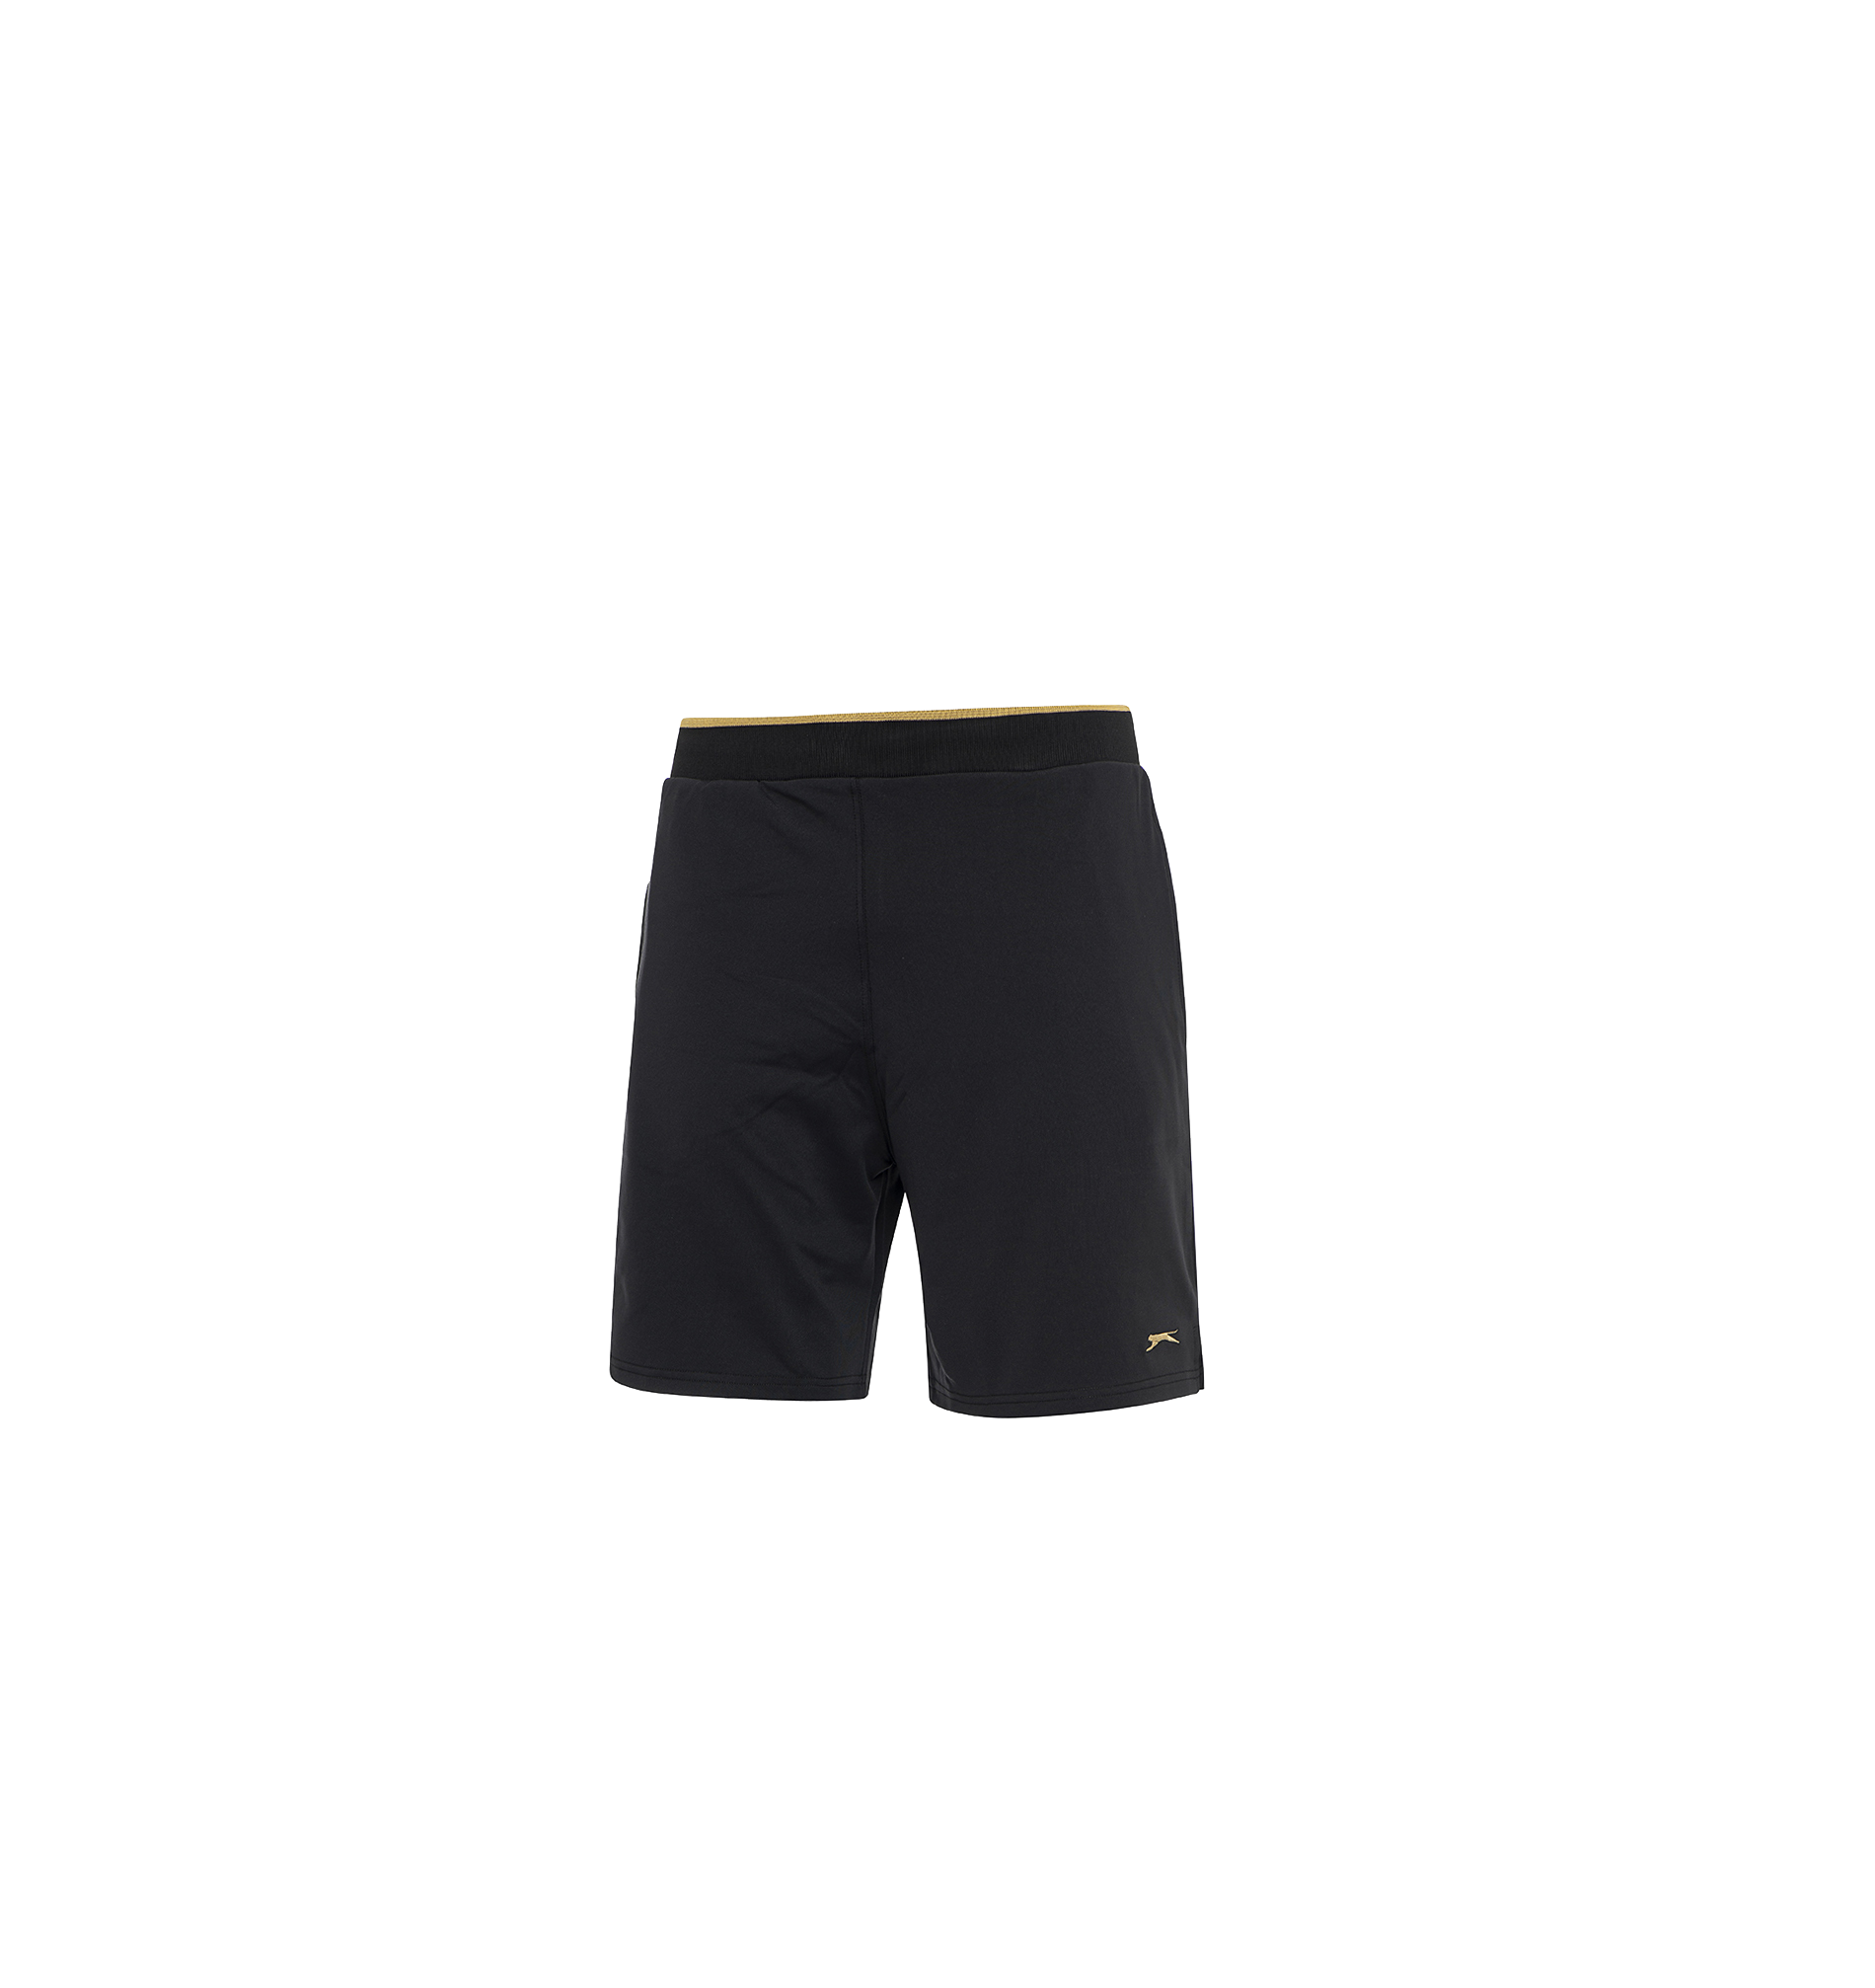 DIEGO TRACK SHORTS PANTHER BLACK